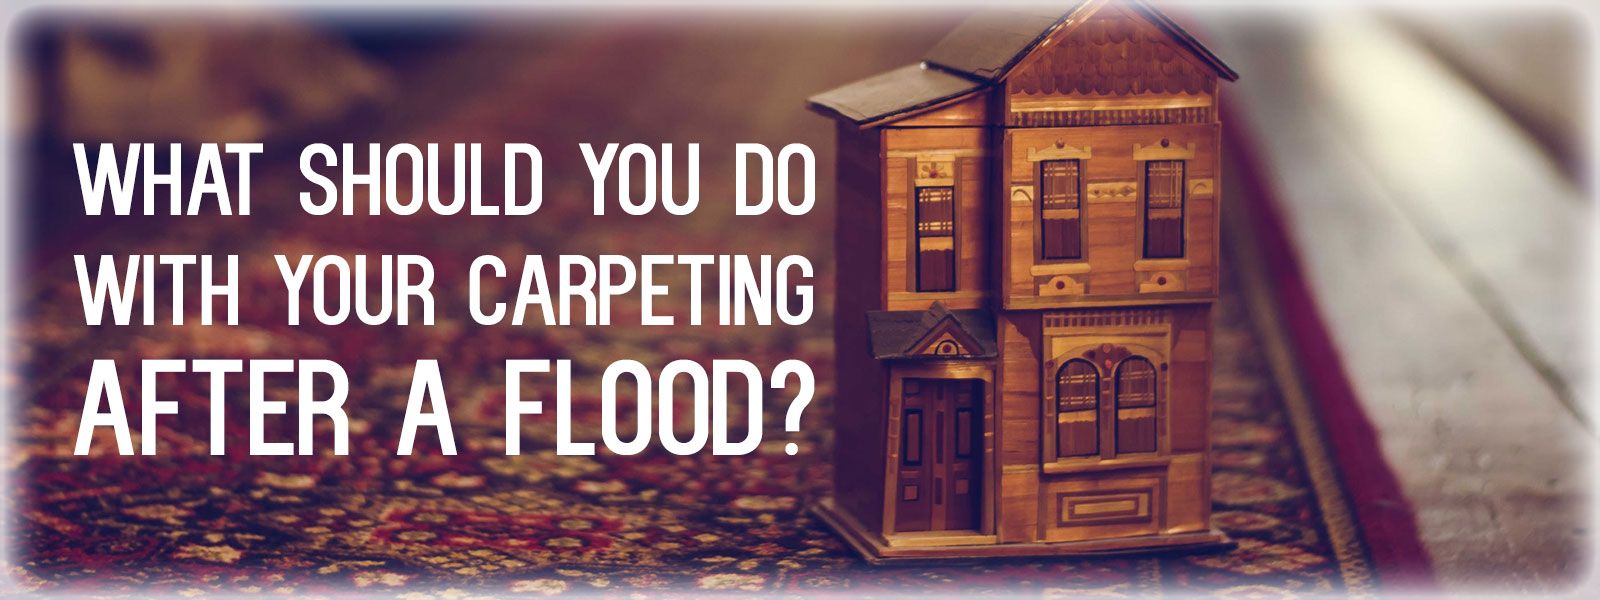 What-Should-You-Do-With-Your-Carpeting-After-A-Flood